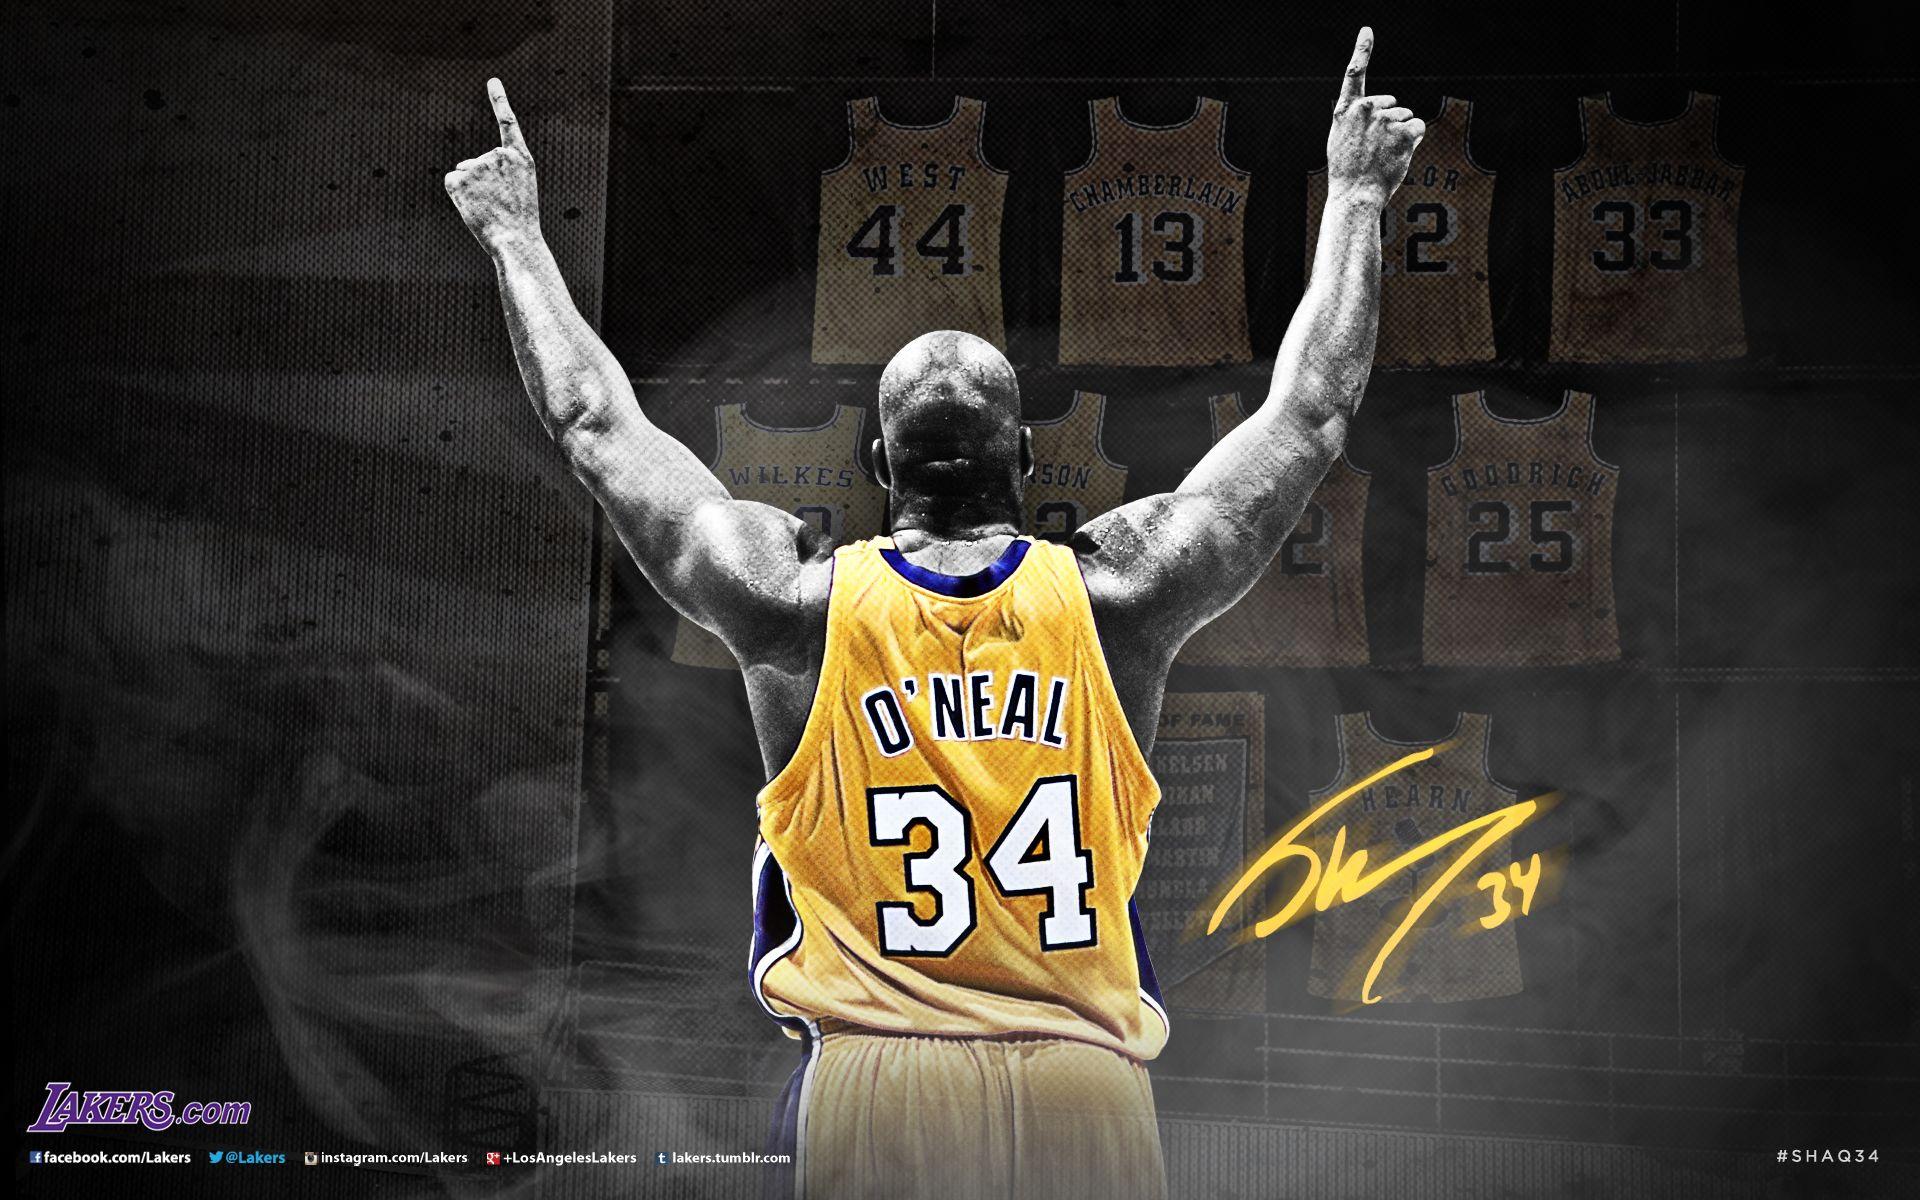 Mobile wallpaper: Sports, Basketball, Nba, Los Angeles Lakers, Lebron James,  1160882 download the picture for free.